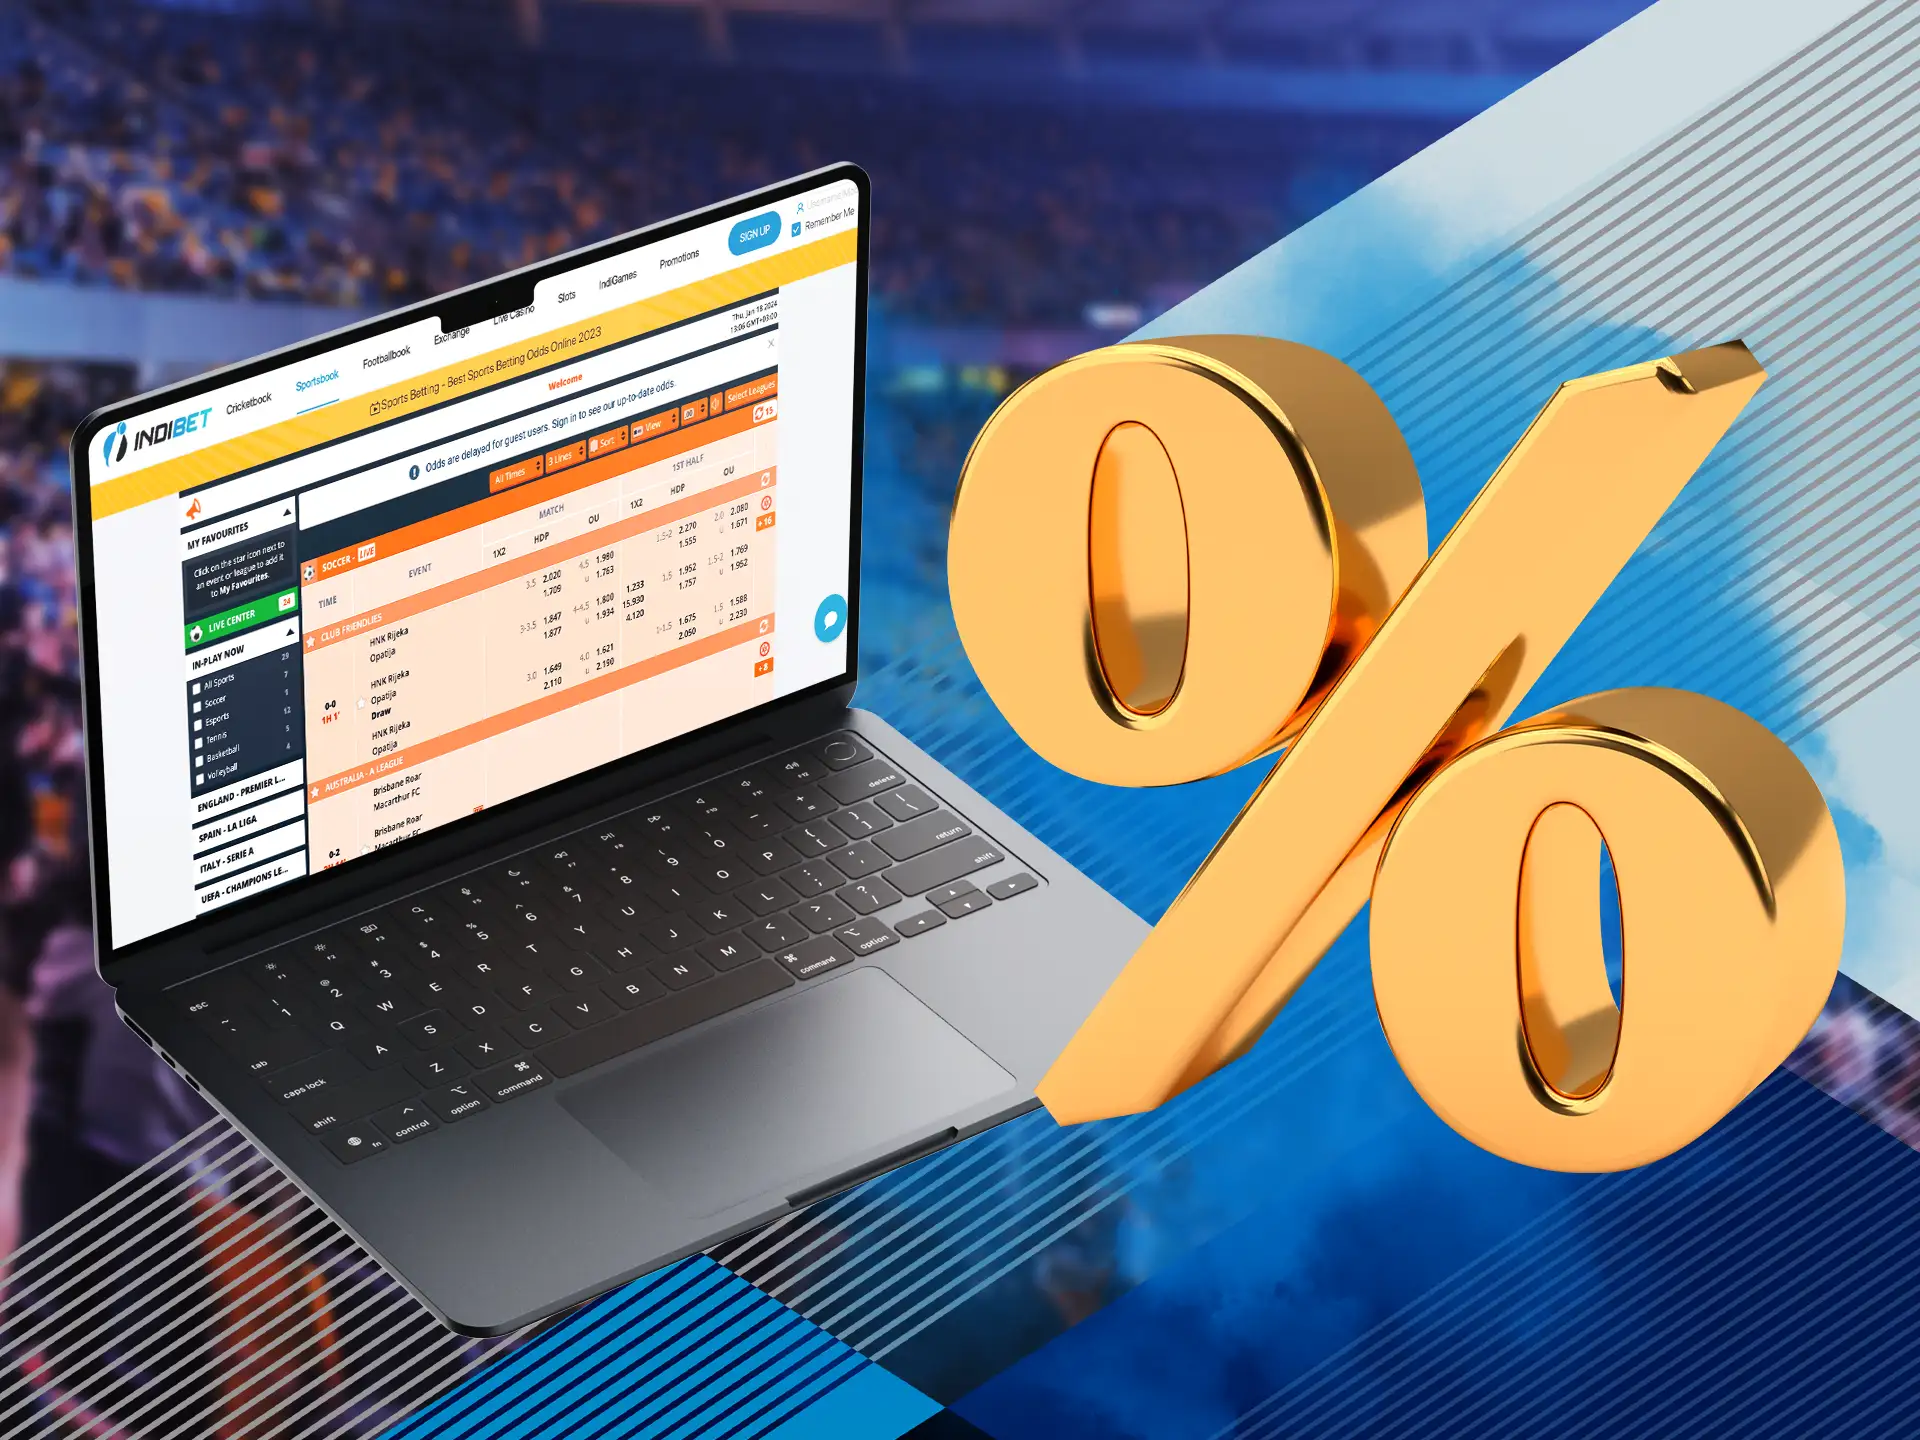 To increase your chances of winning, your choice should be focused on betting sites that offer high odds.